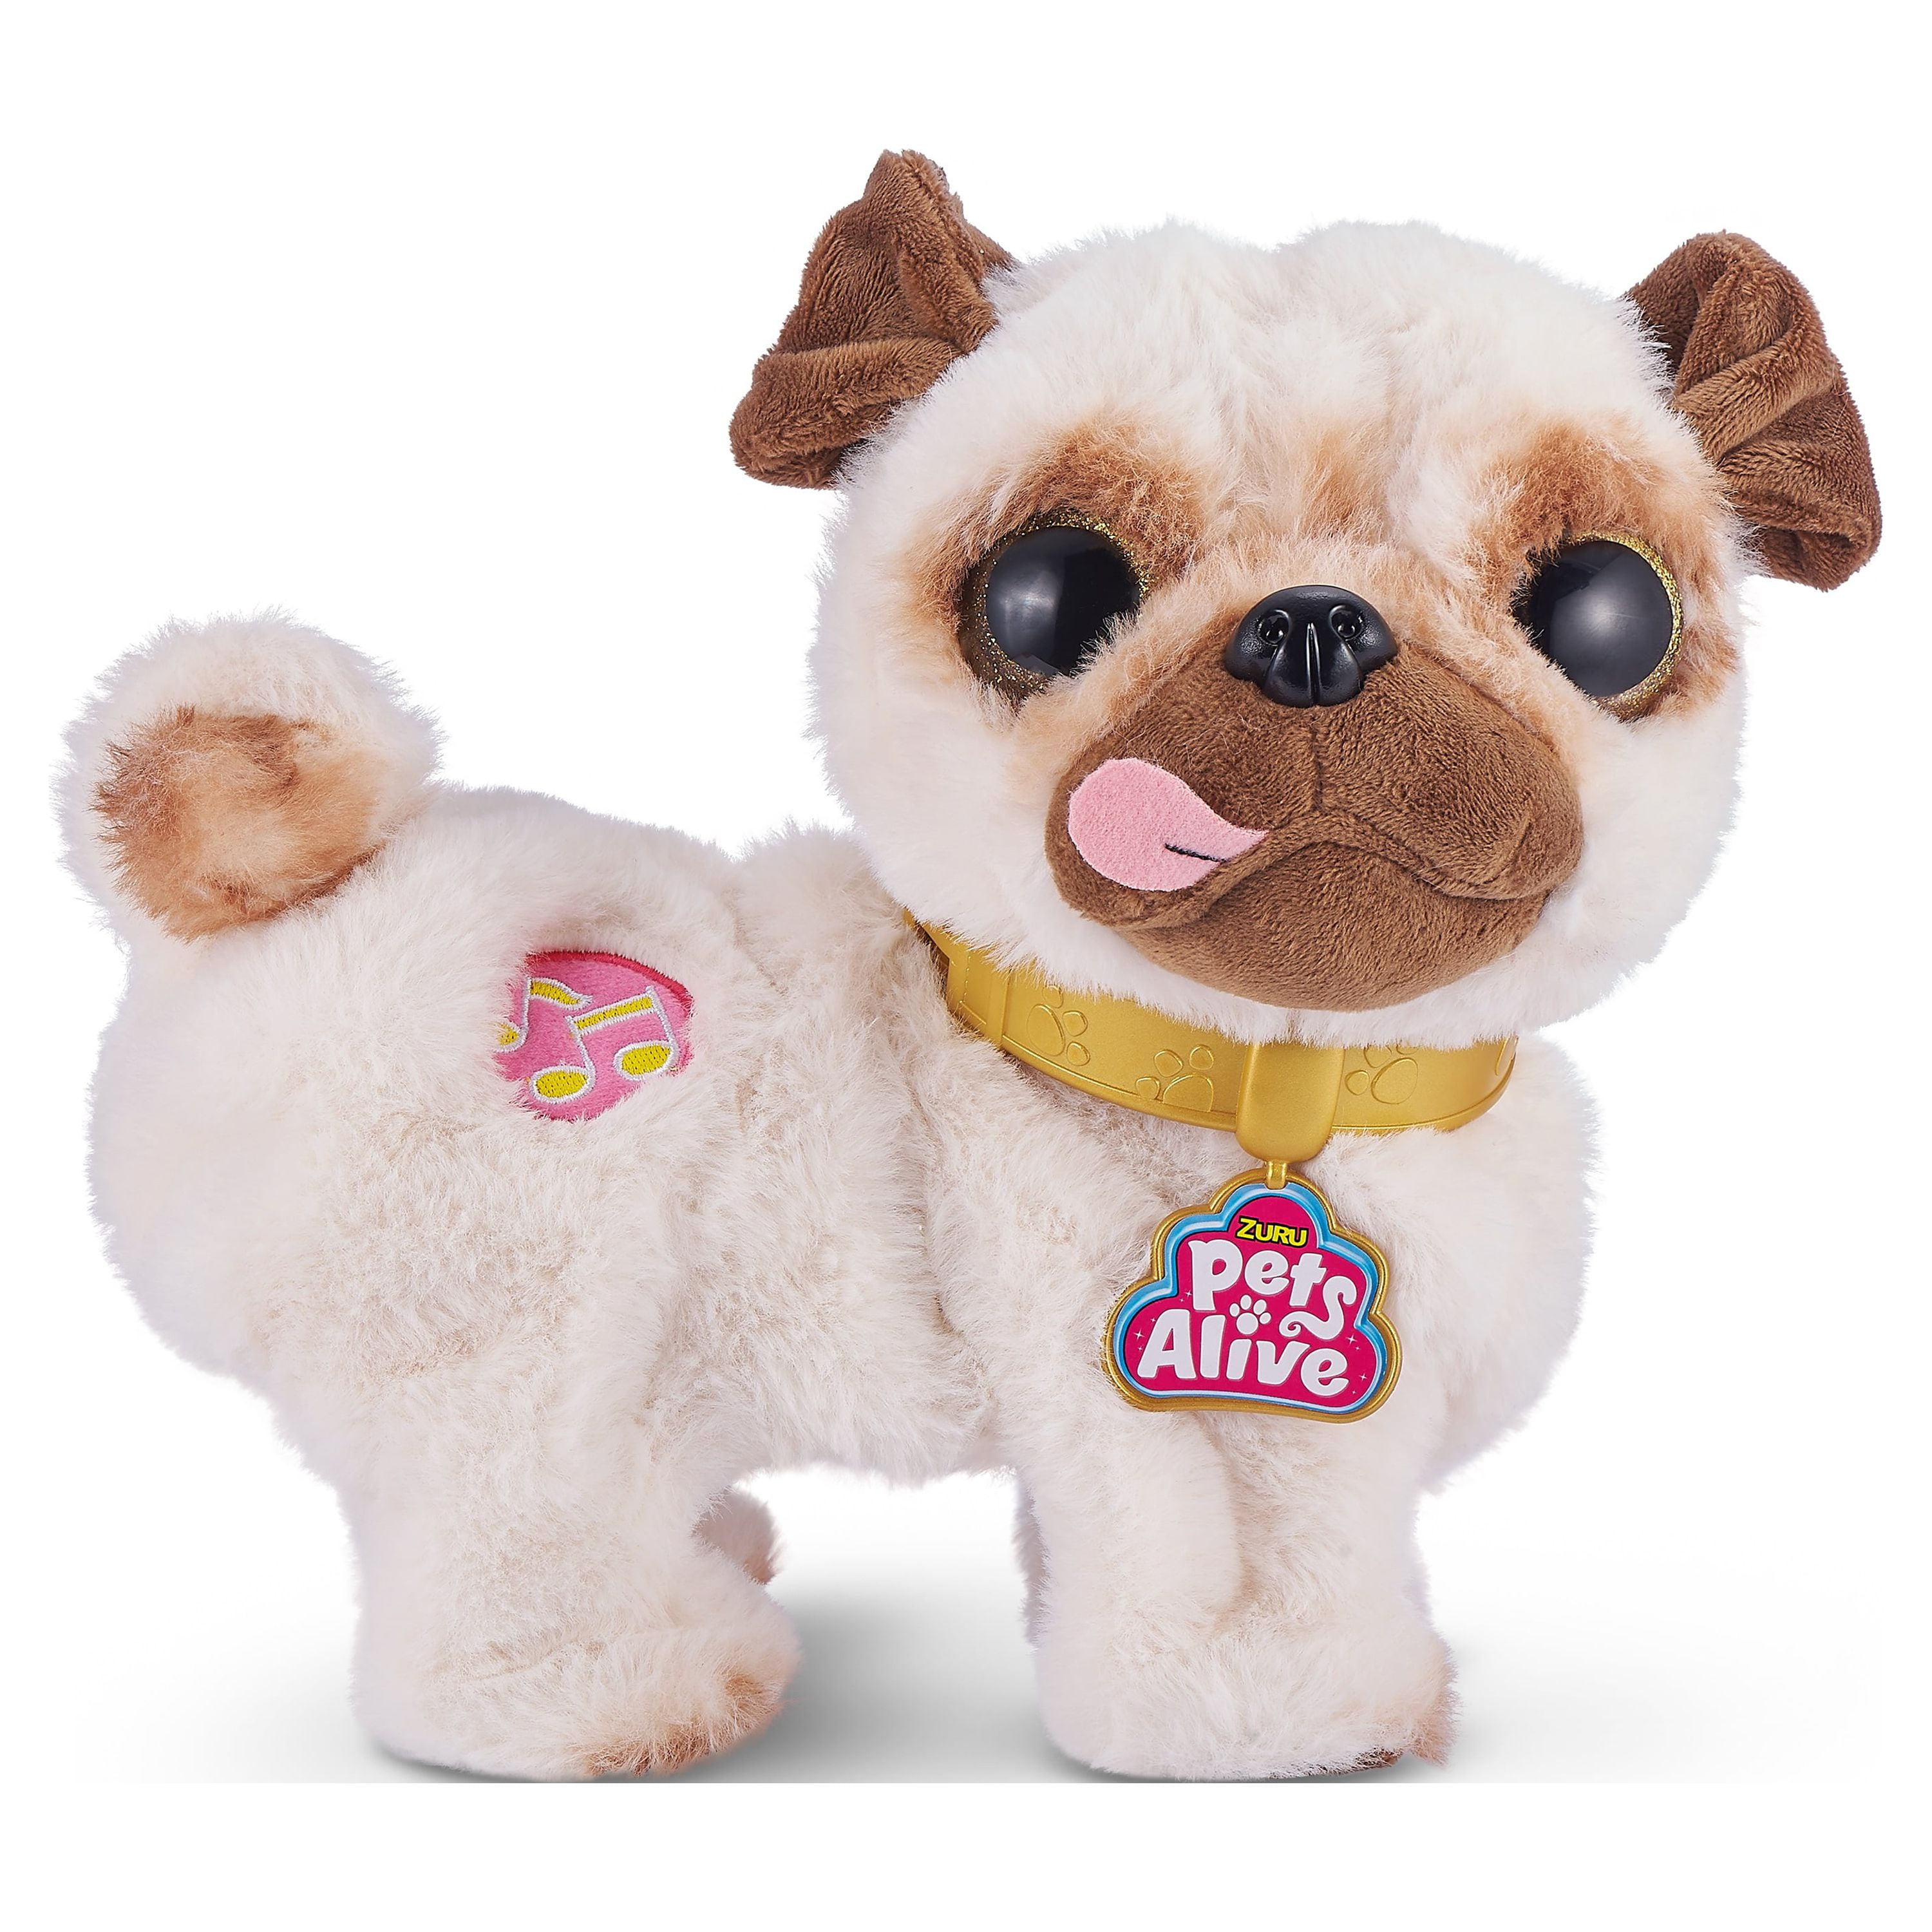 Pets Alive Poppy the Booty Shakin' Pug – Interactive Dancing Plush